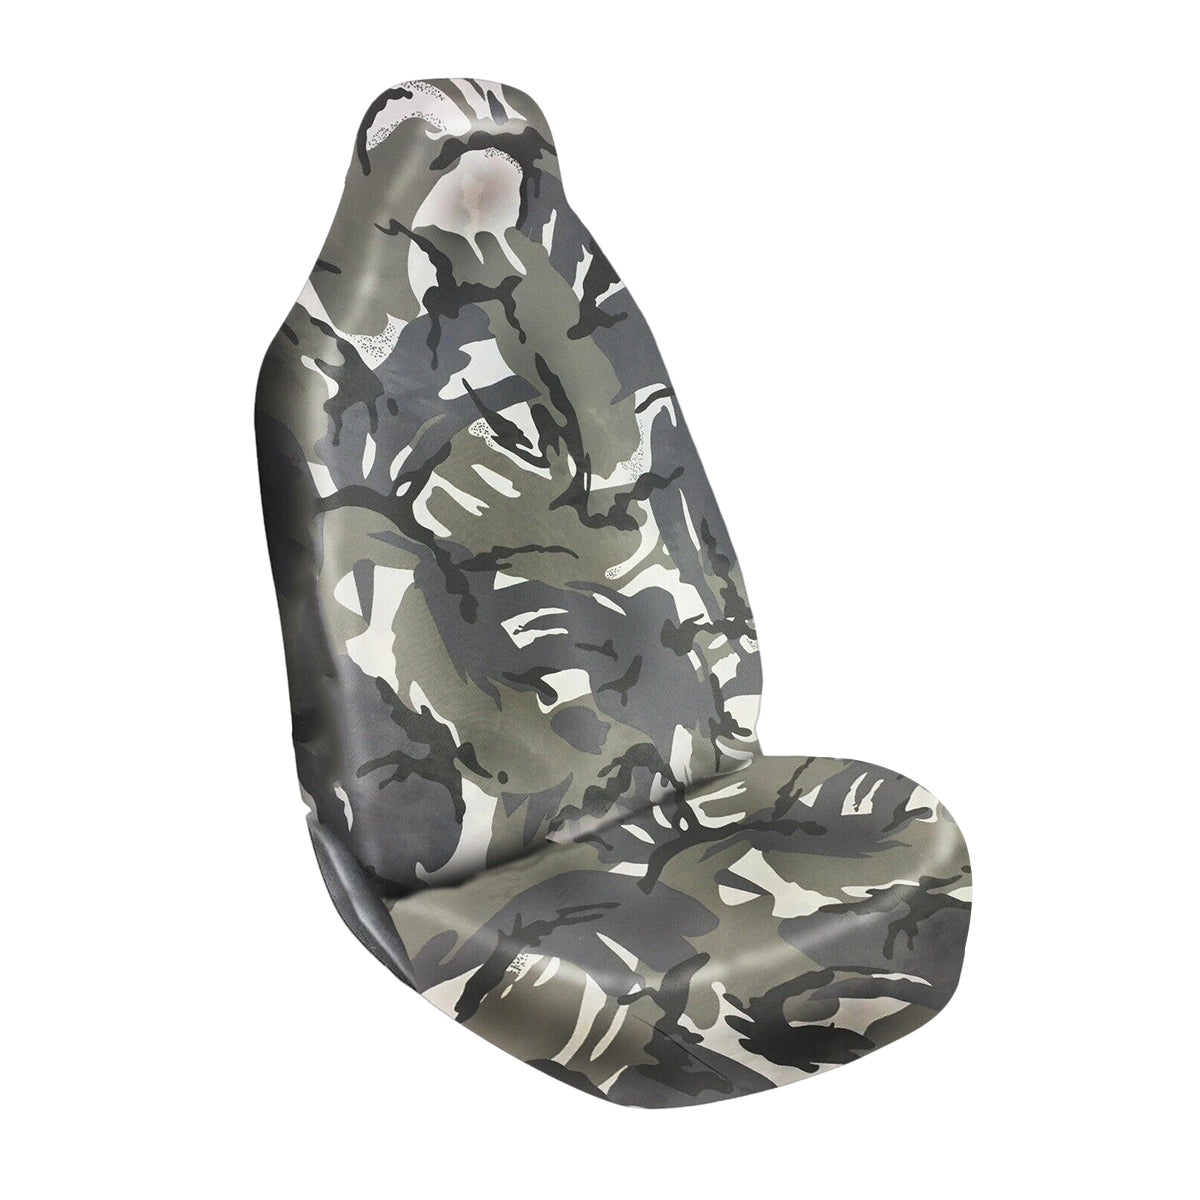 Green Camo Front Auto Seat Full Covers Universal Protector for Car Truck SUV Van - Auto GoShop